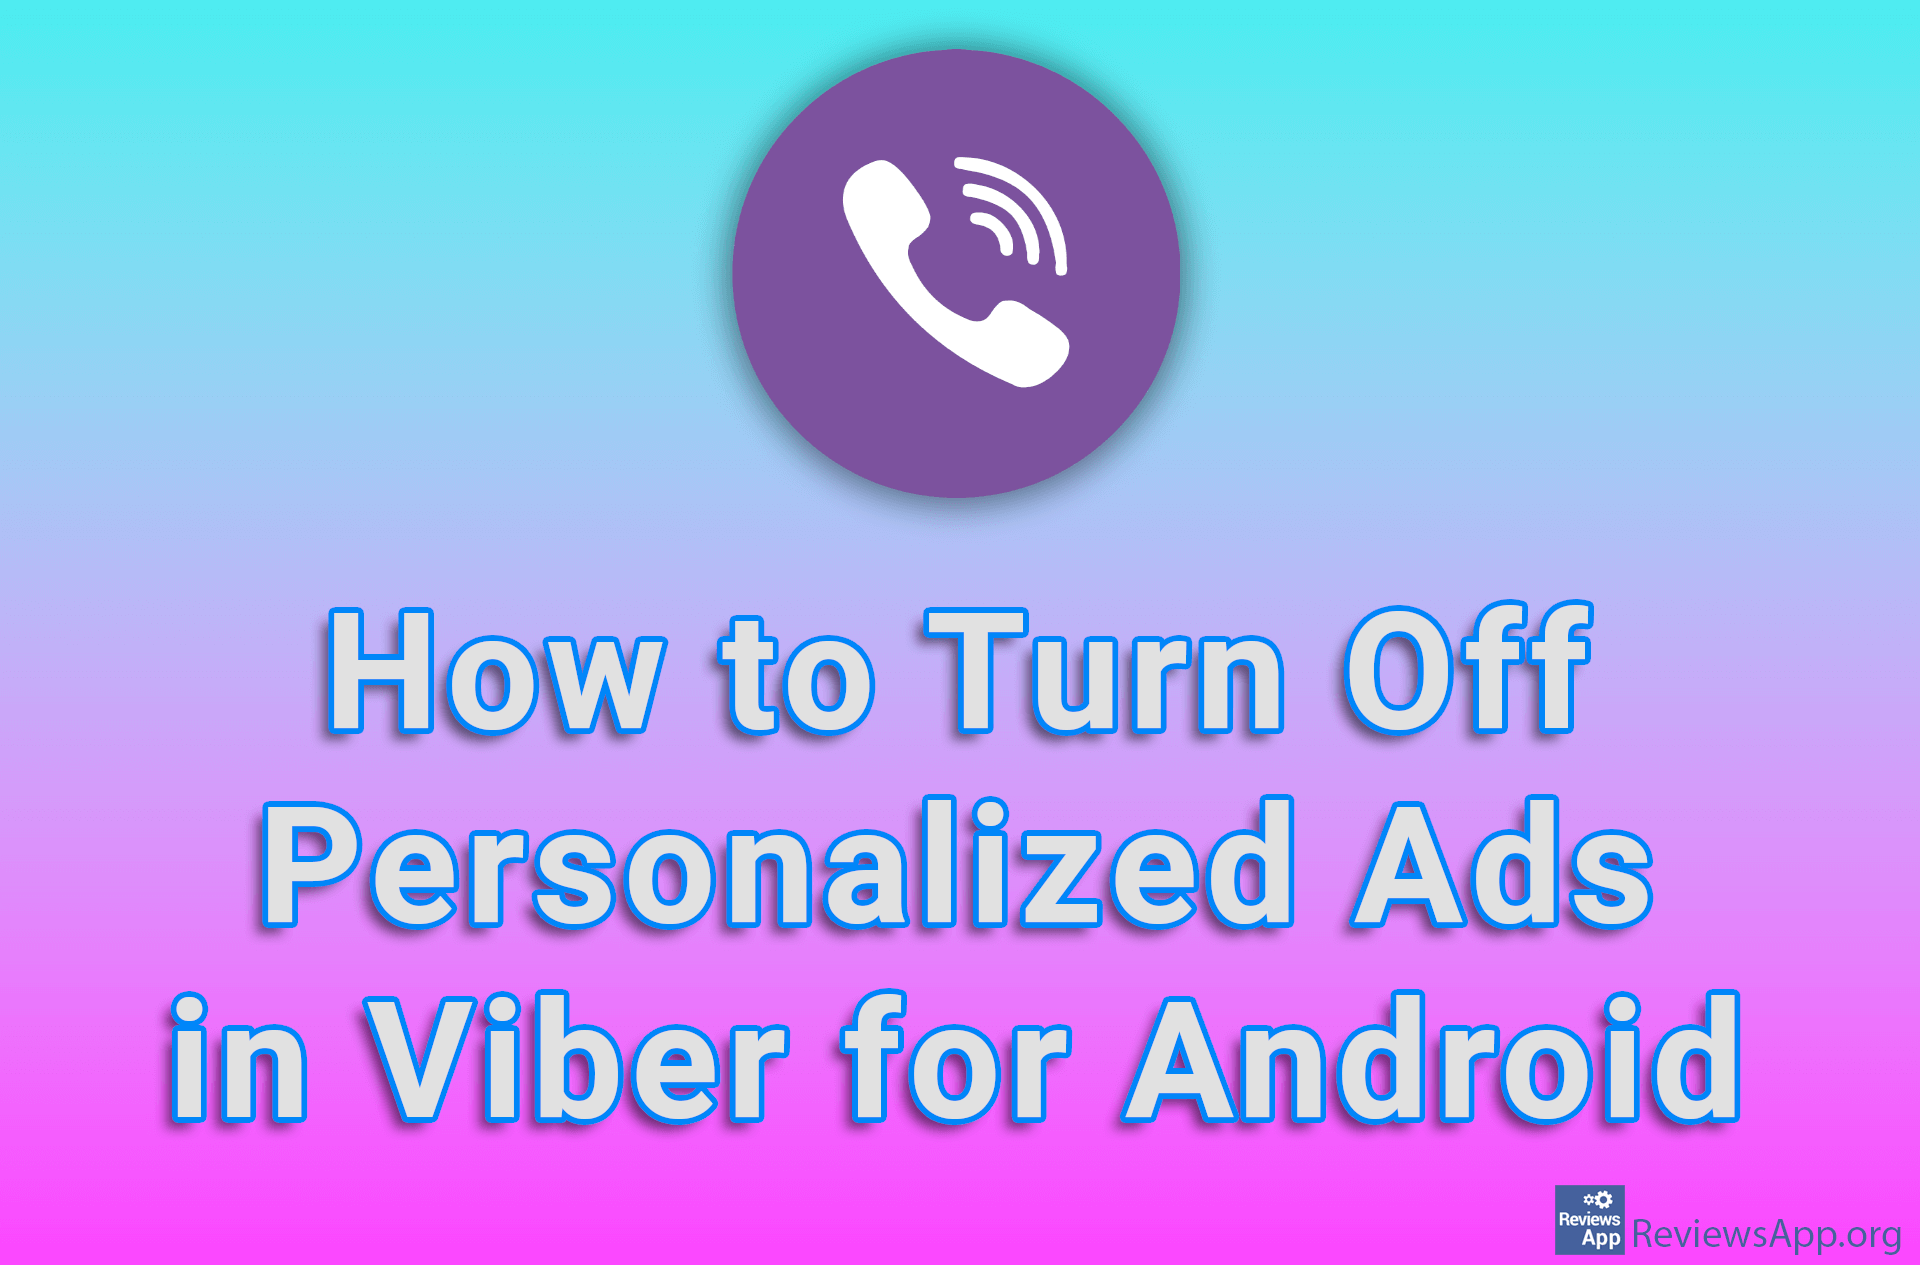 How to Turn Off Personalized Ads in Viber for Android